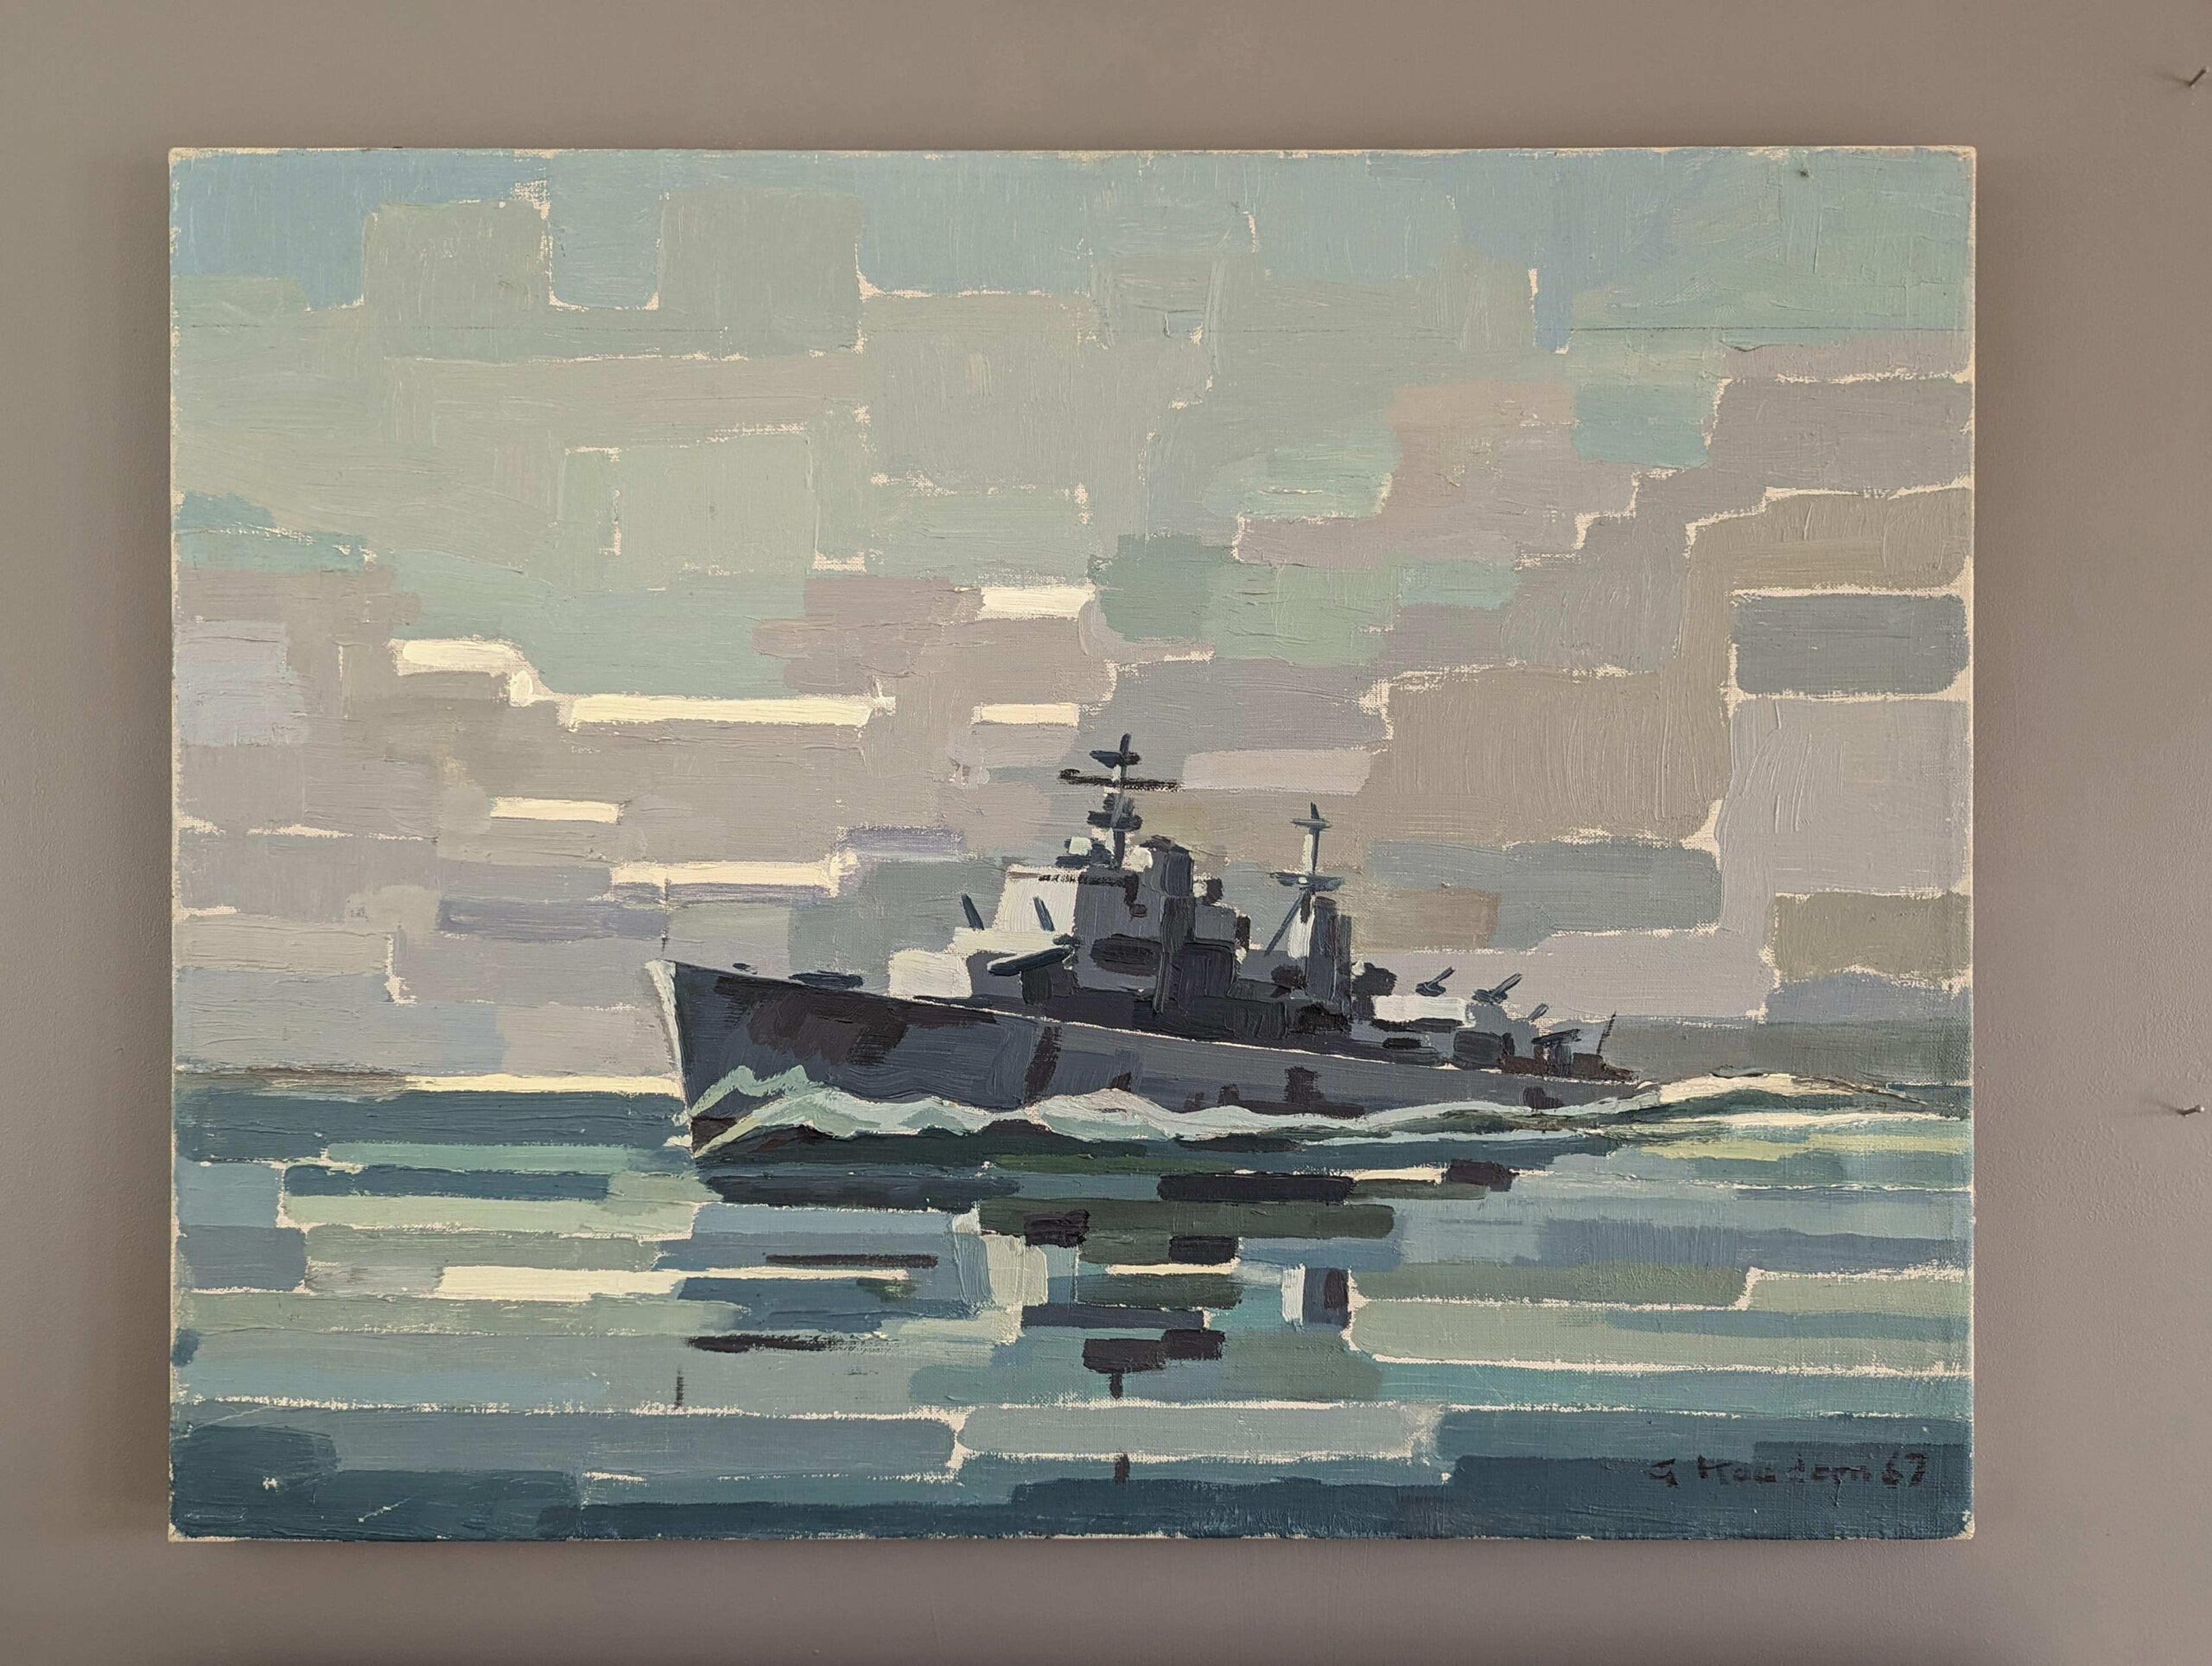 THE NAVY SHIP
Size: 50 x 65 cm
Oil on Canvas

An oustanding modernist style seascape composition, executed in oil onto canvas and dated 1967.

Containing semi-abstract elements, the composition features a navy ship out at sea. The artist has